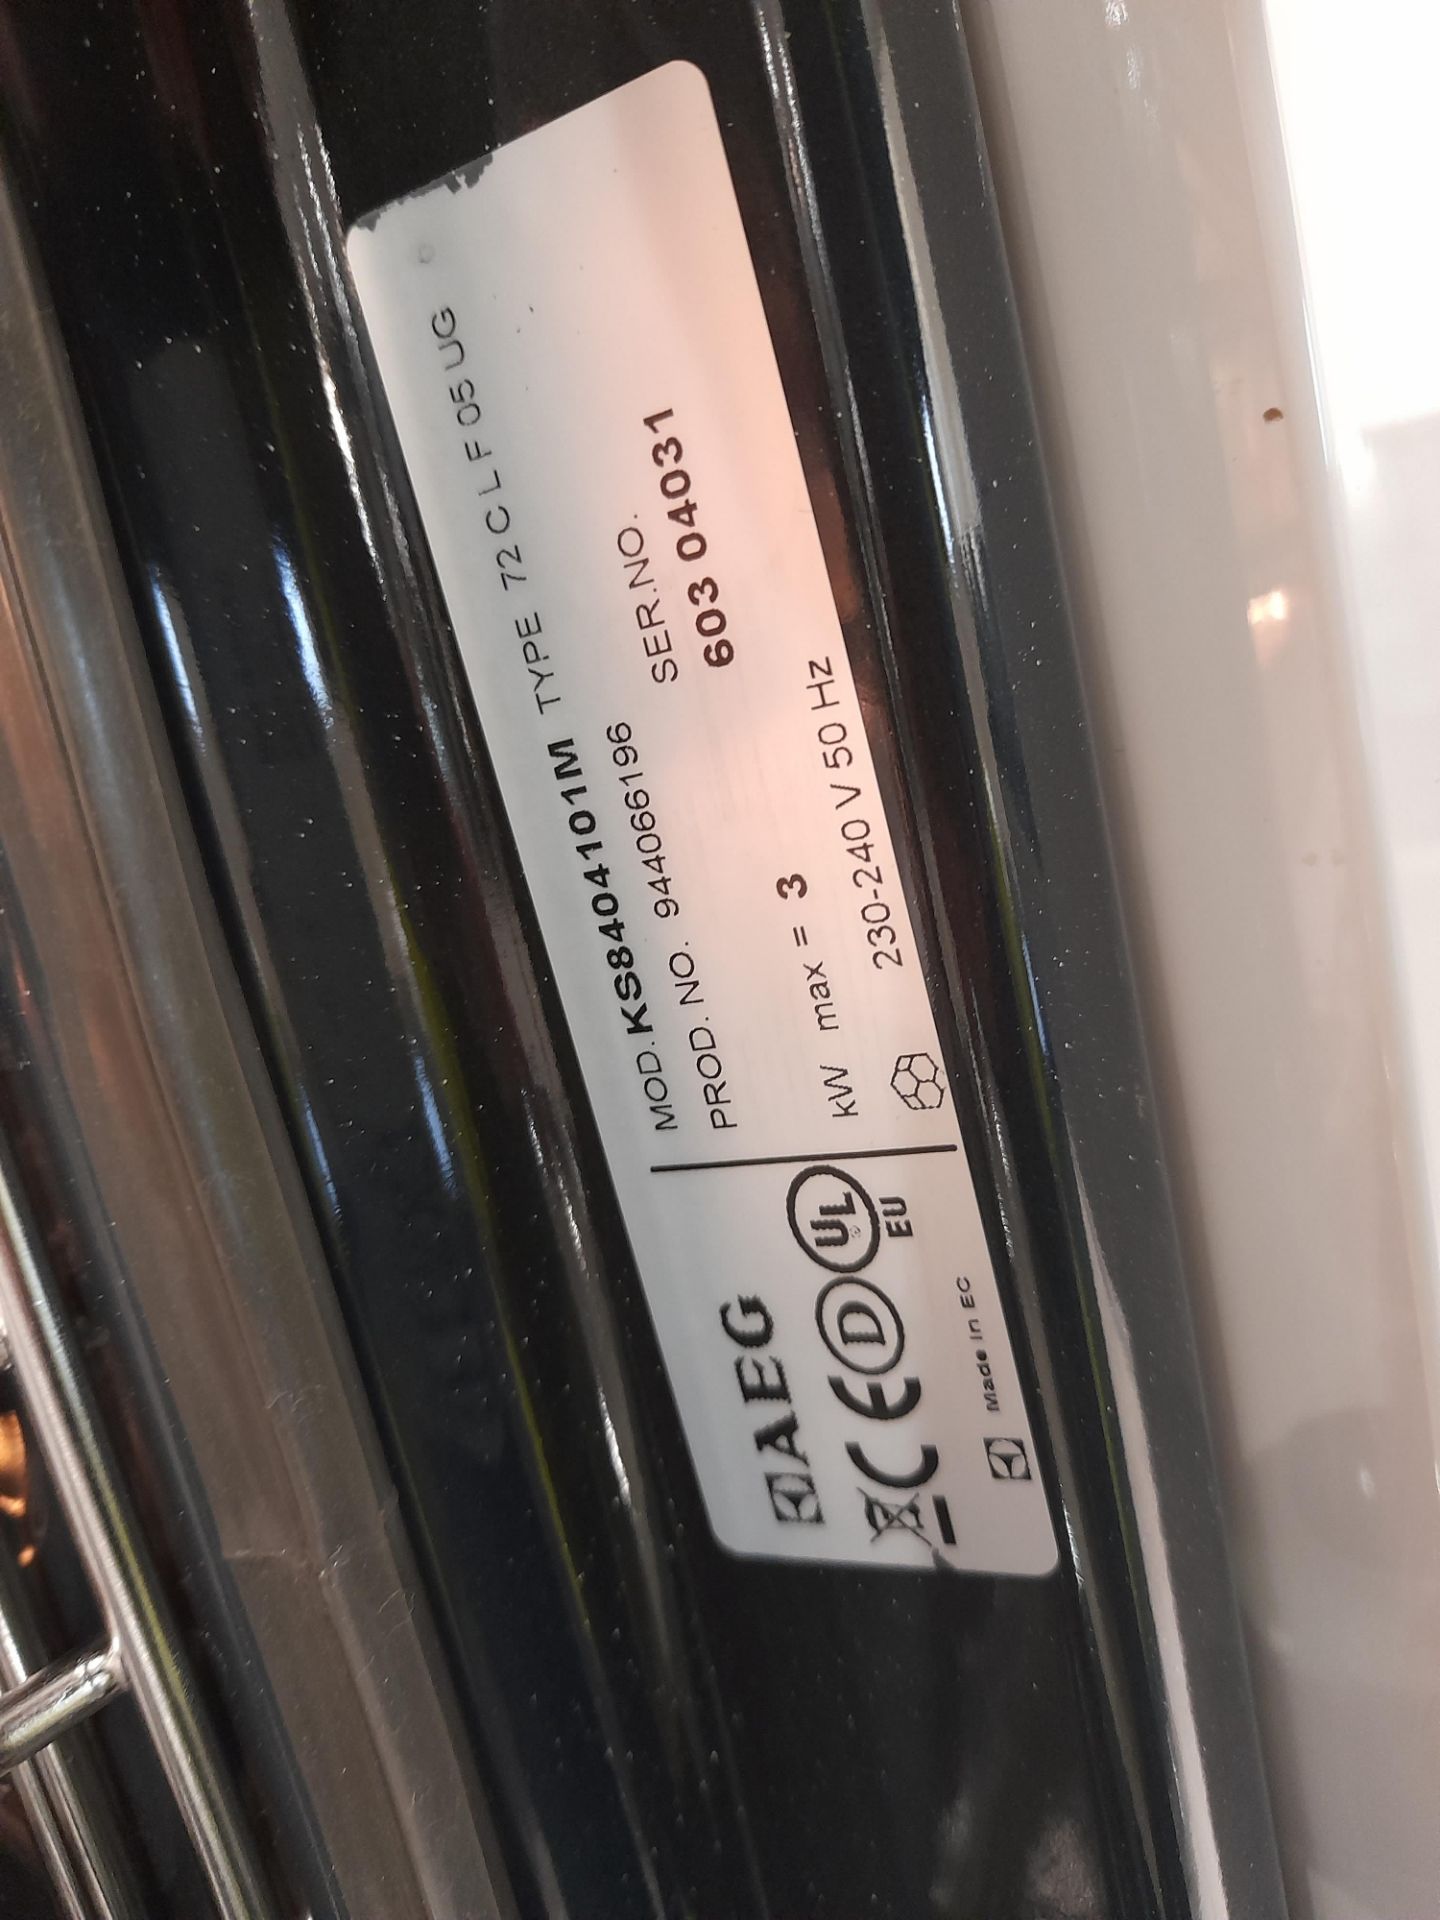 AEG KS8404101M integrated combi oven Please note, - Image 3 of 3